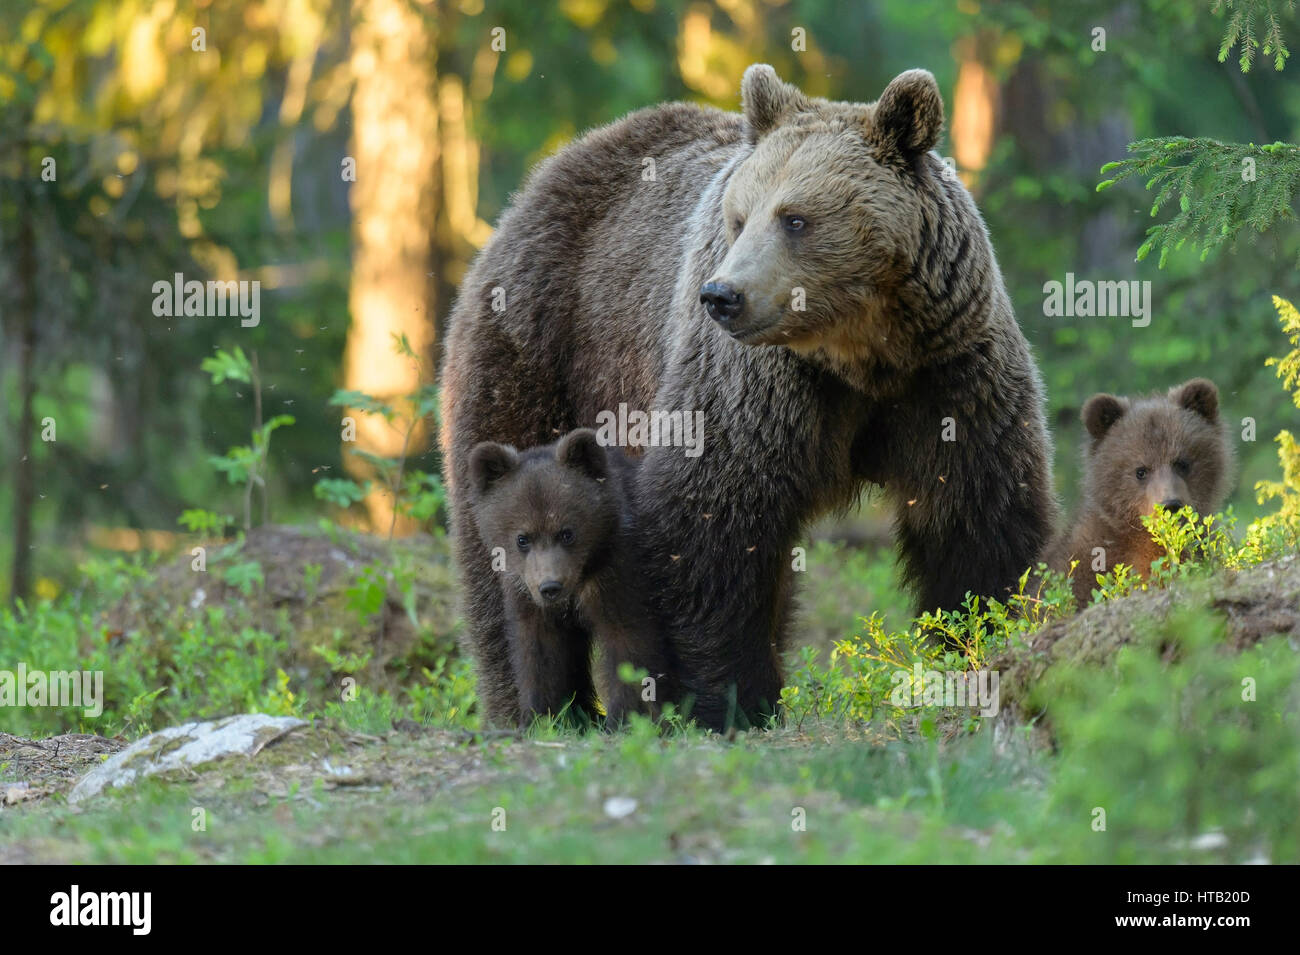 Brown bear with young animal, she-bear with boys in the wood, Braunbaer mit Jungtier, Baerin mit Jungen im Wald Stock Photo